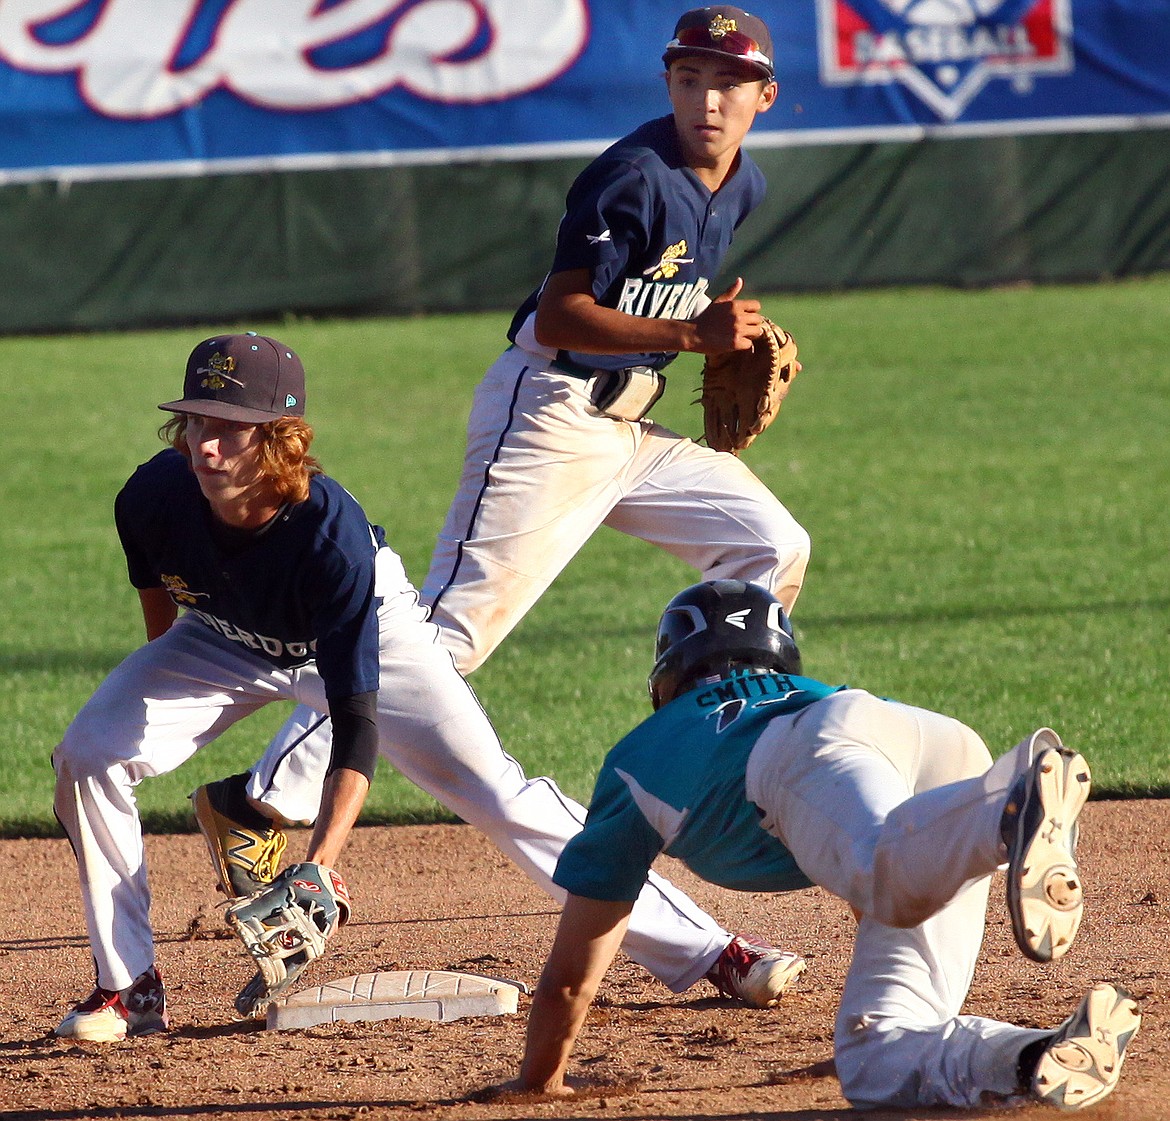 Rodney Harwood/Columbia Basin HeraldMoses Lake River Dogs second baseman Emmitt Tatum waits to make a play on a steal during the North Washington state championship. The River Dog U16 team is in the National League pool at the Senior Babe Ruth World Series.